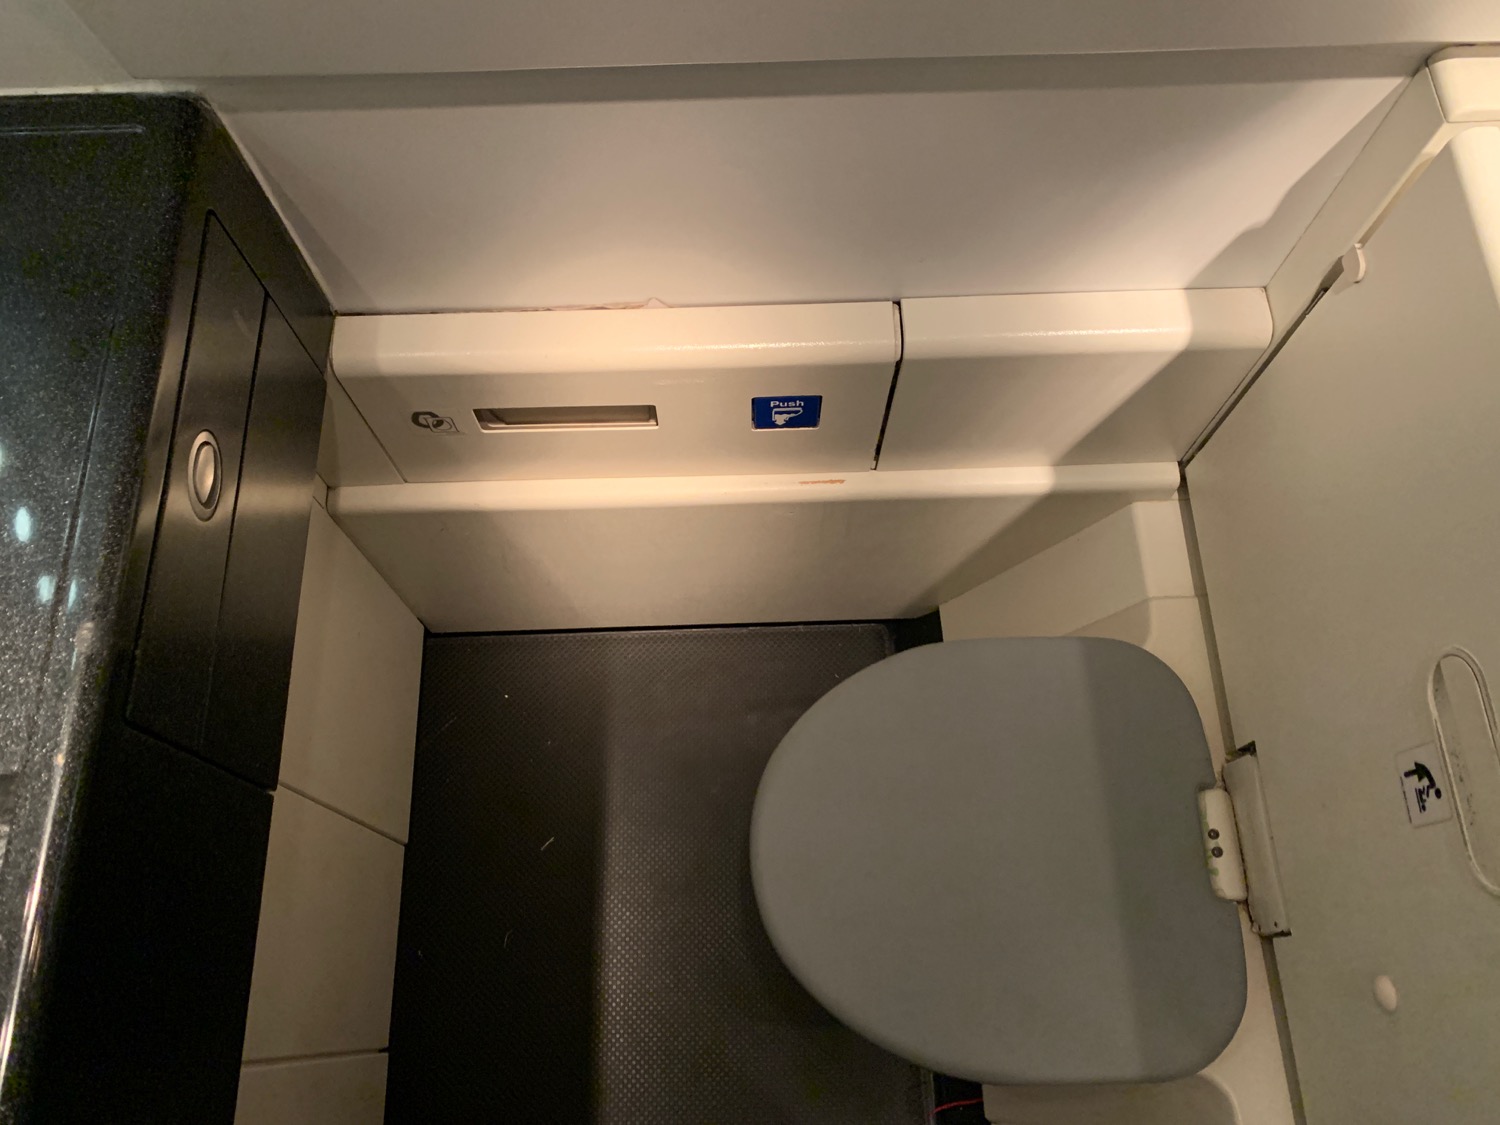 a toilet in a small bathroom